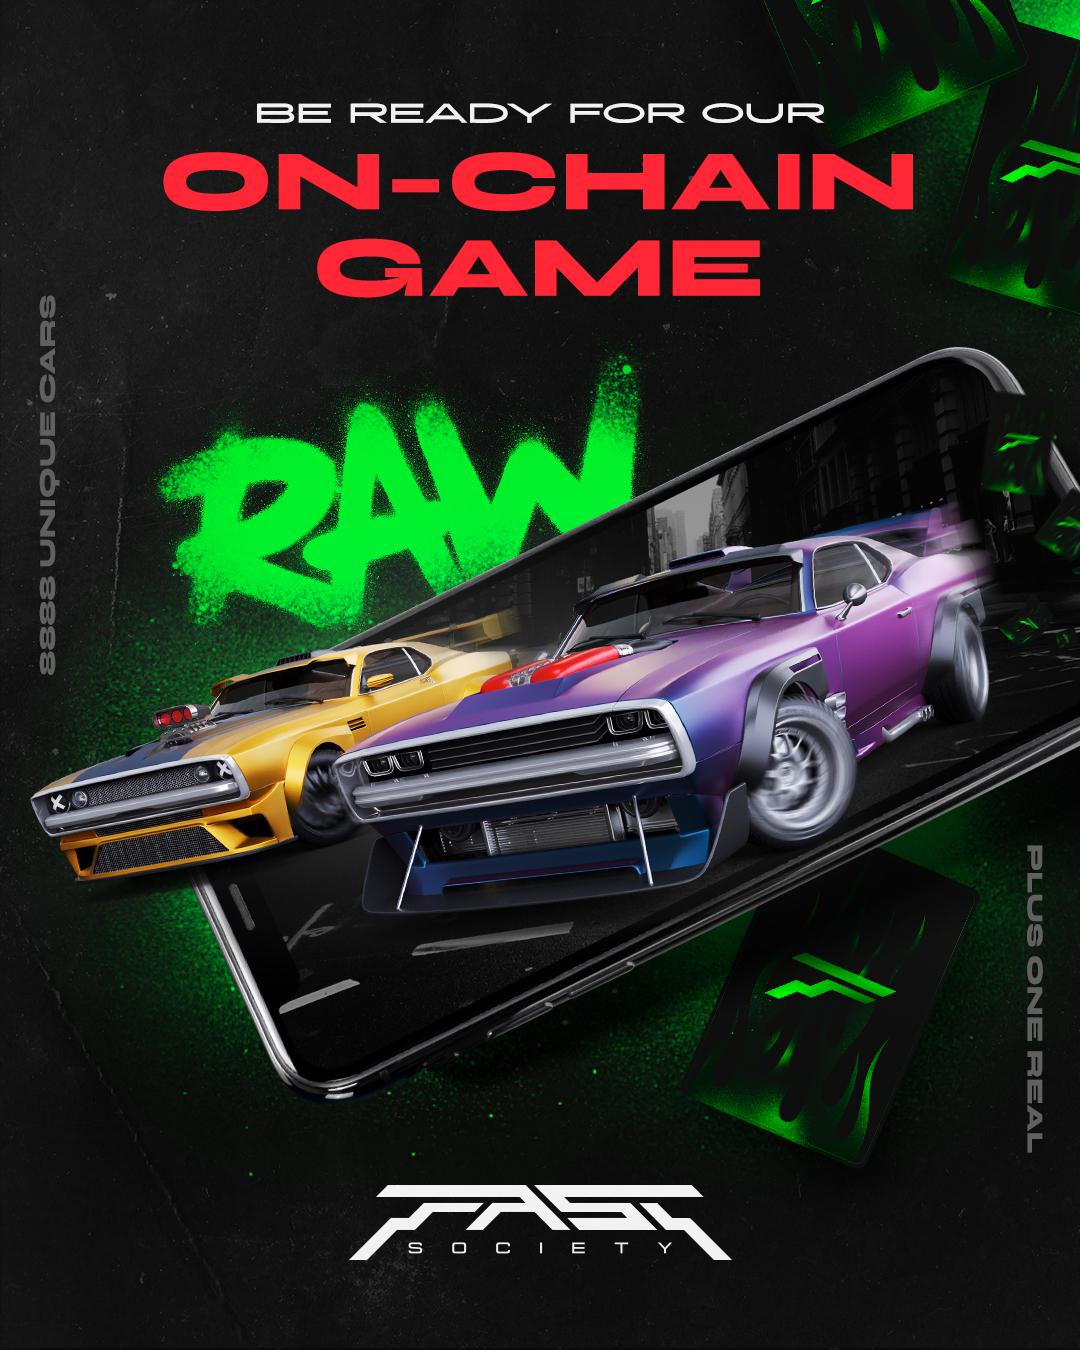 on chain mobile game fast society